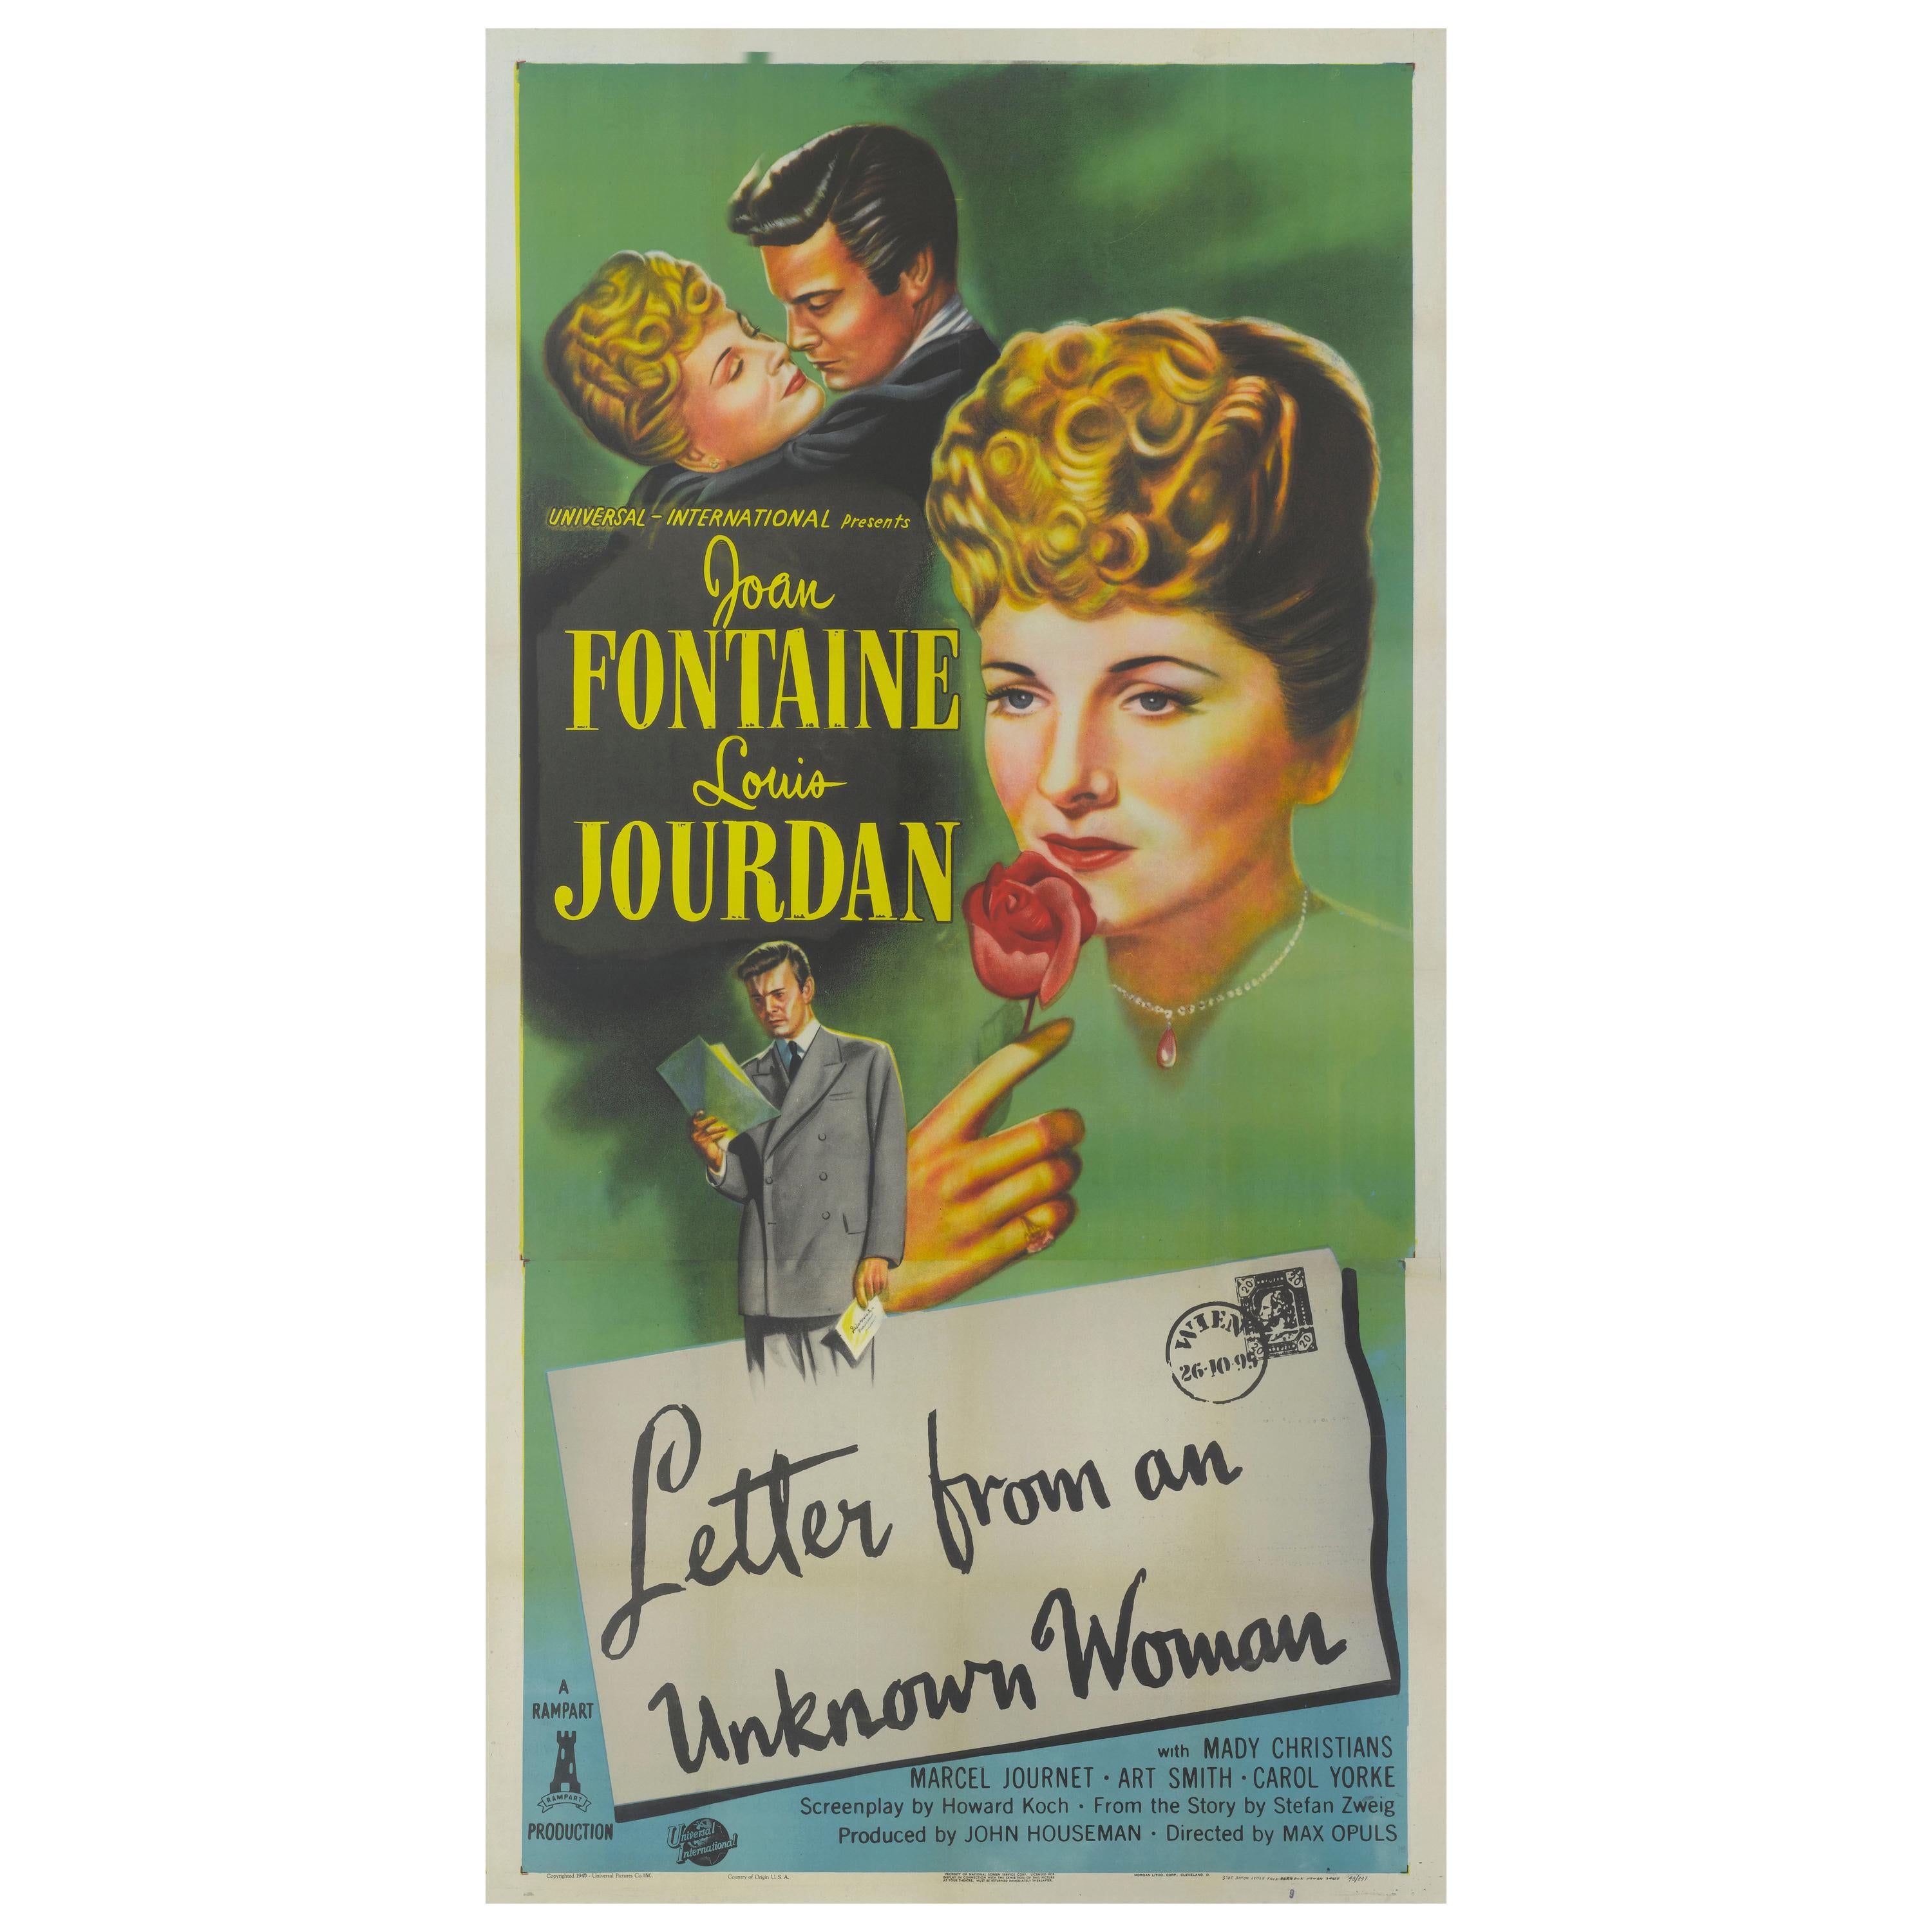 Letter from an Inknown Woman (lettre d'une femme inconnue